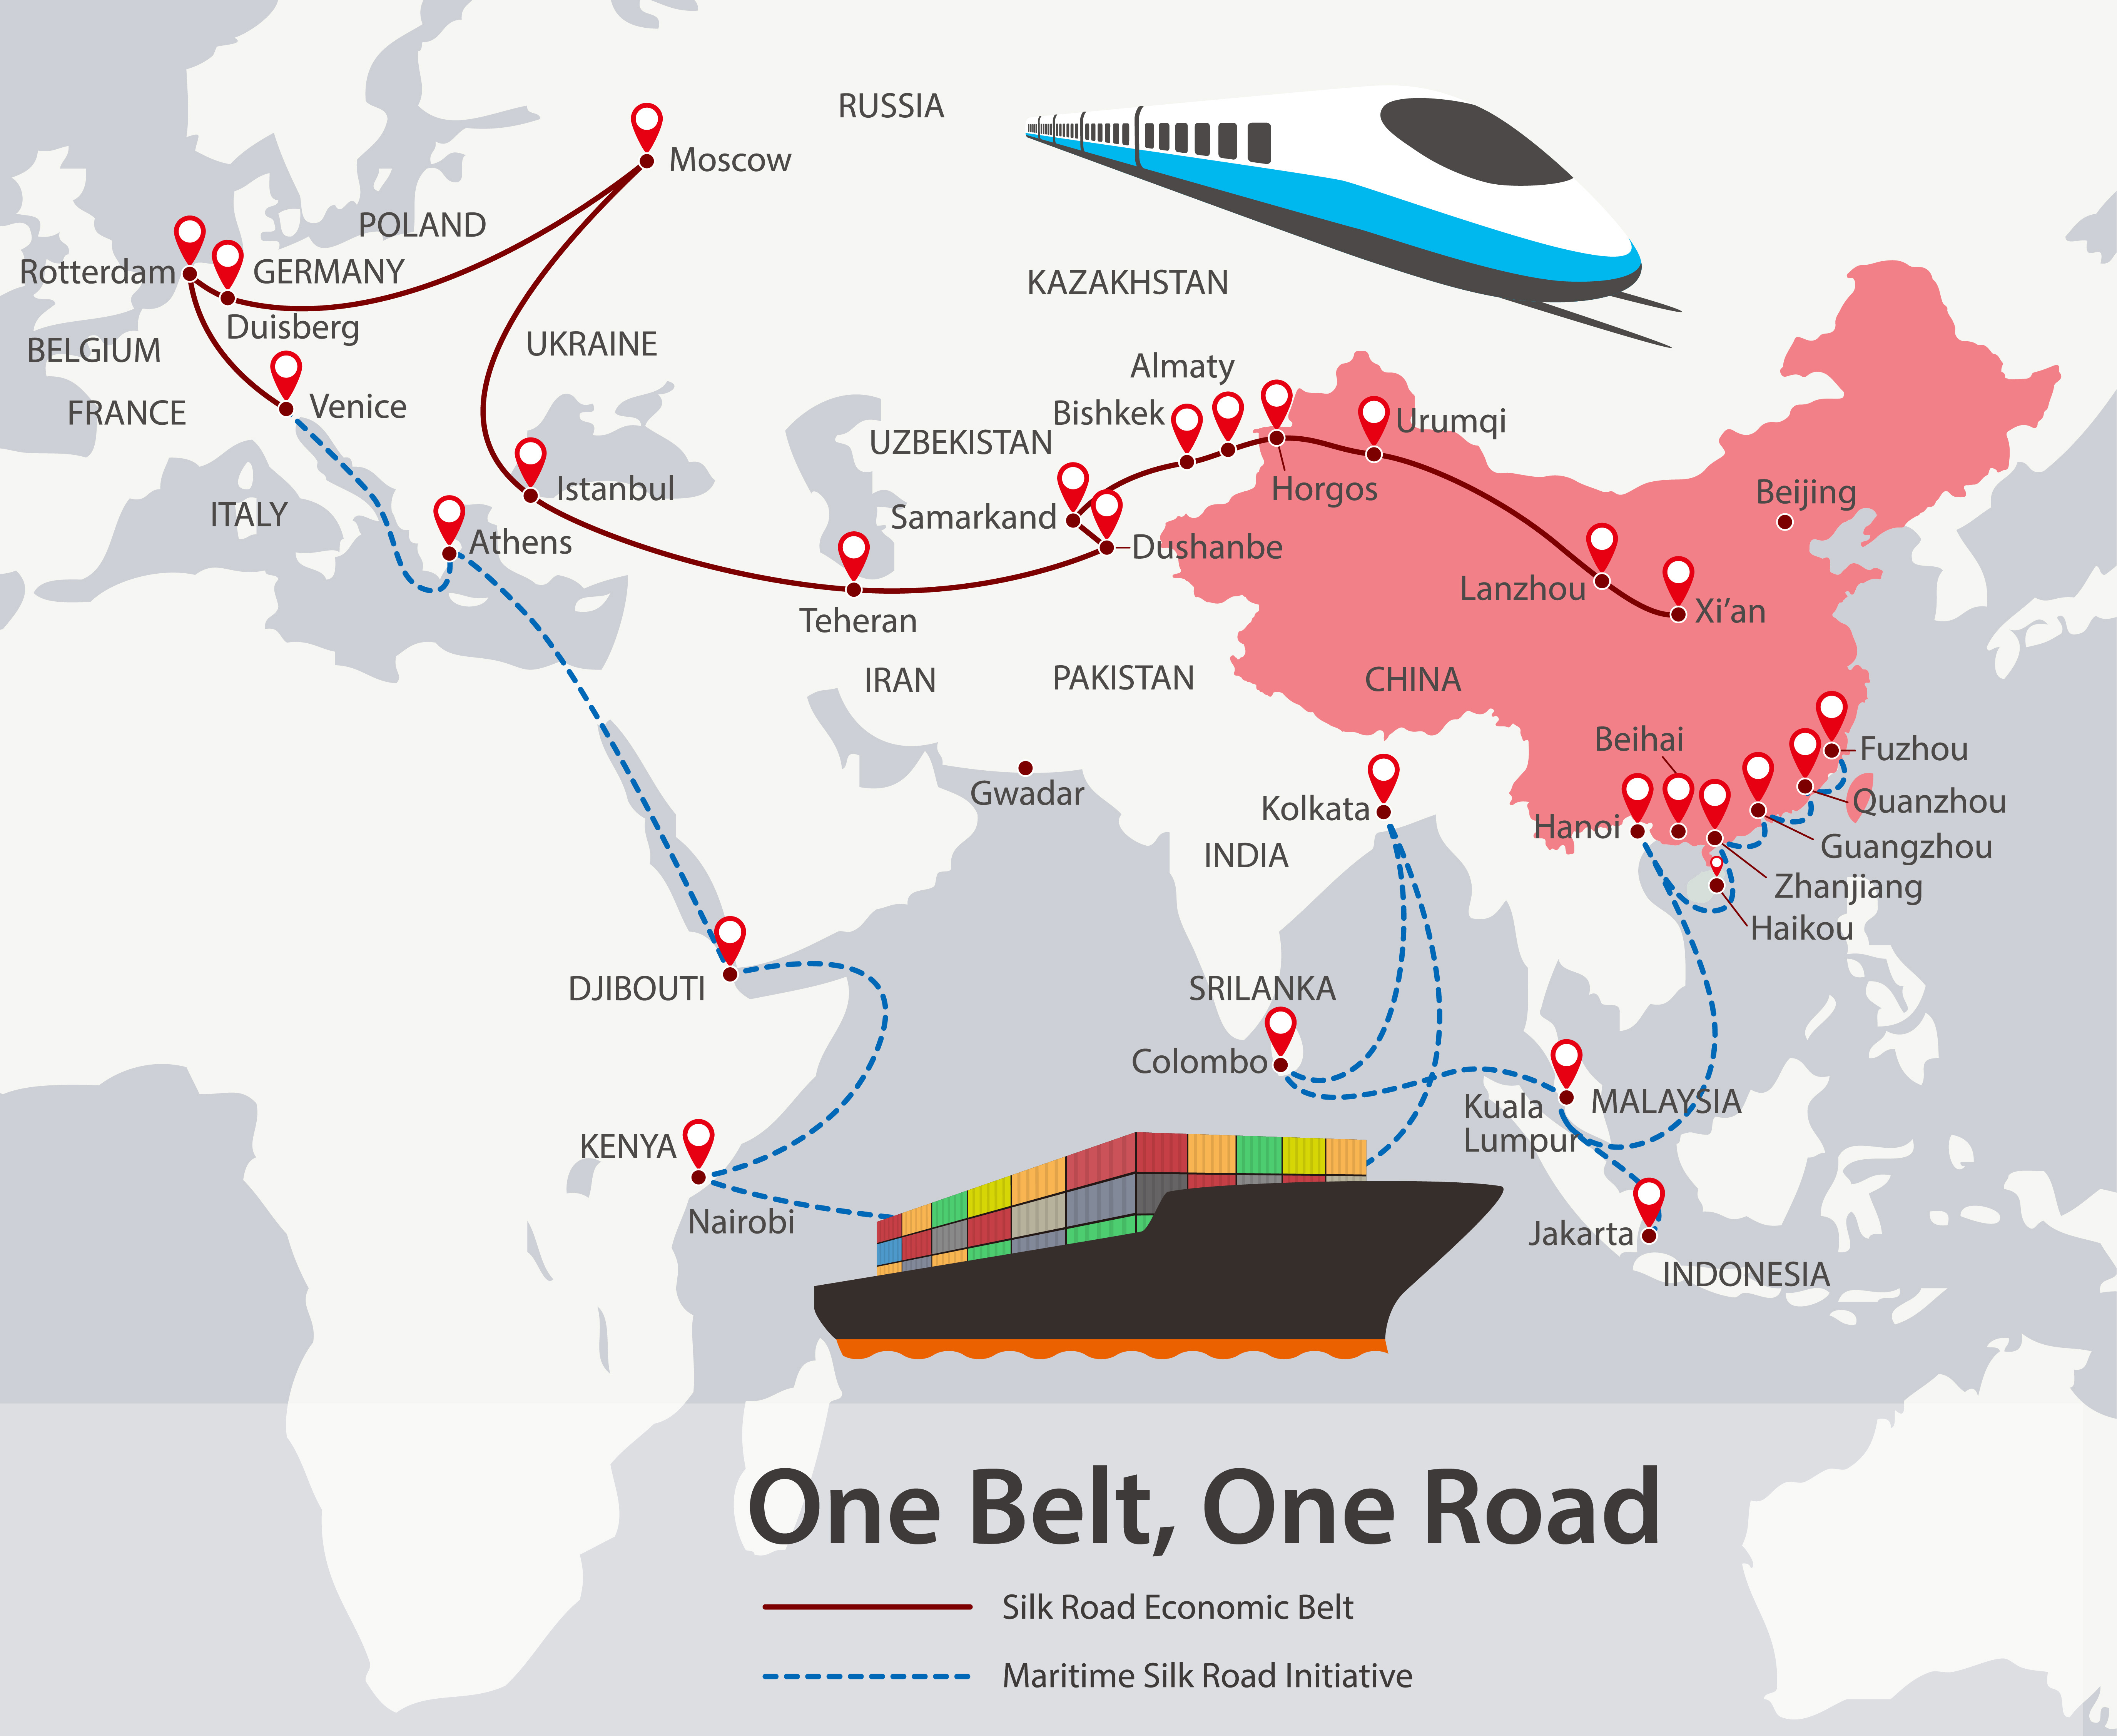 Quehenberger Logistics is expanding its presence along the Silk Road